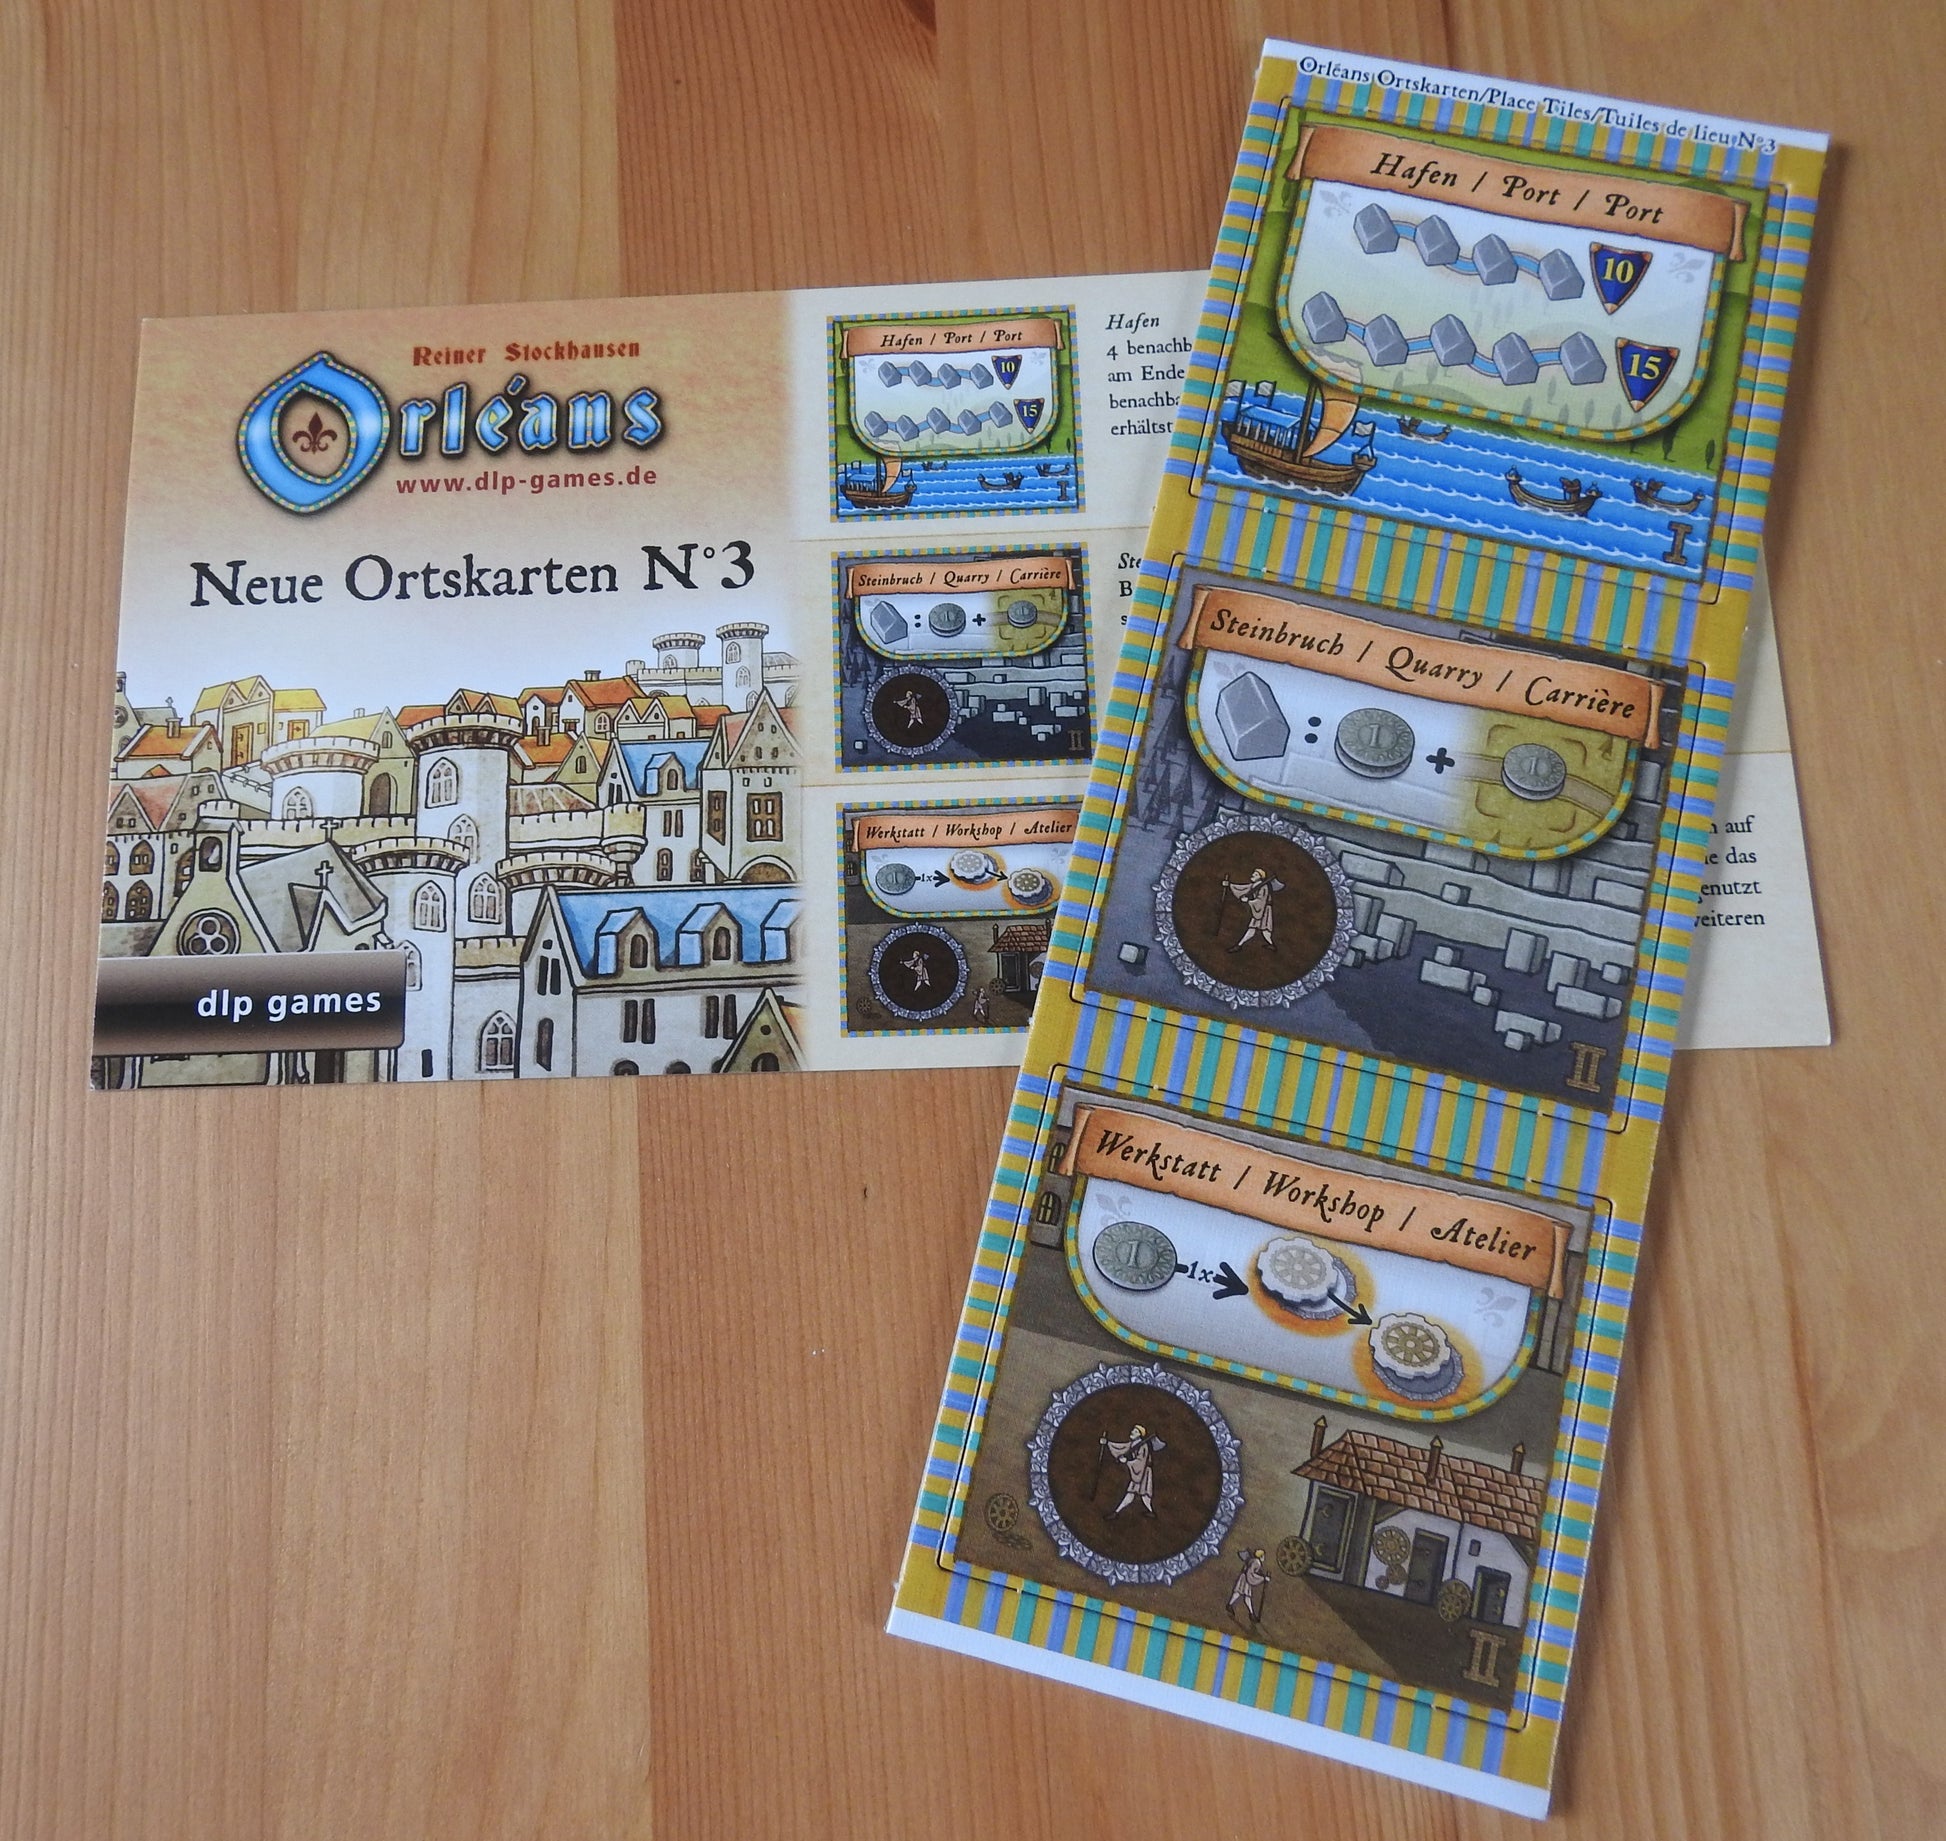 Top view of the 3 new place tiles and rules included with this Orleans - New Place Tiles No.3 mini expansion.